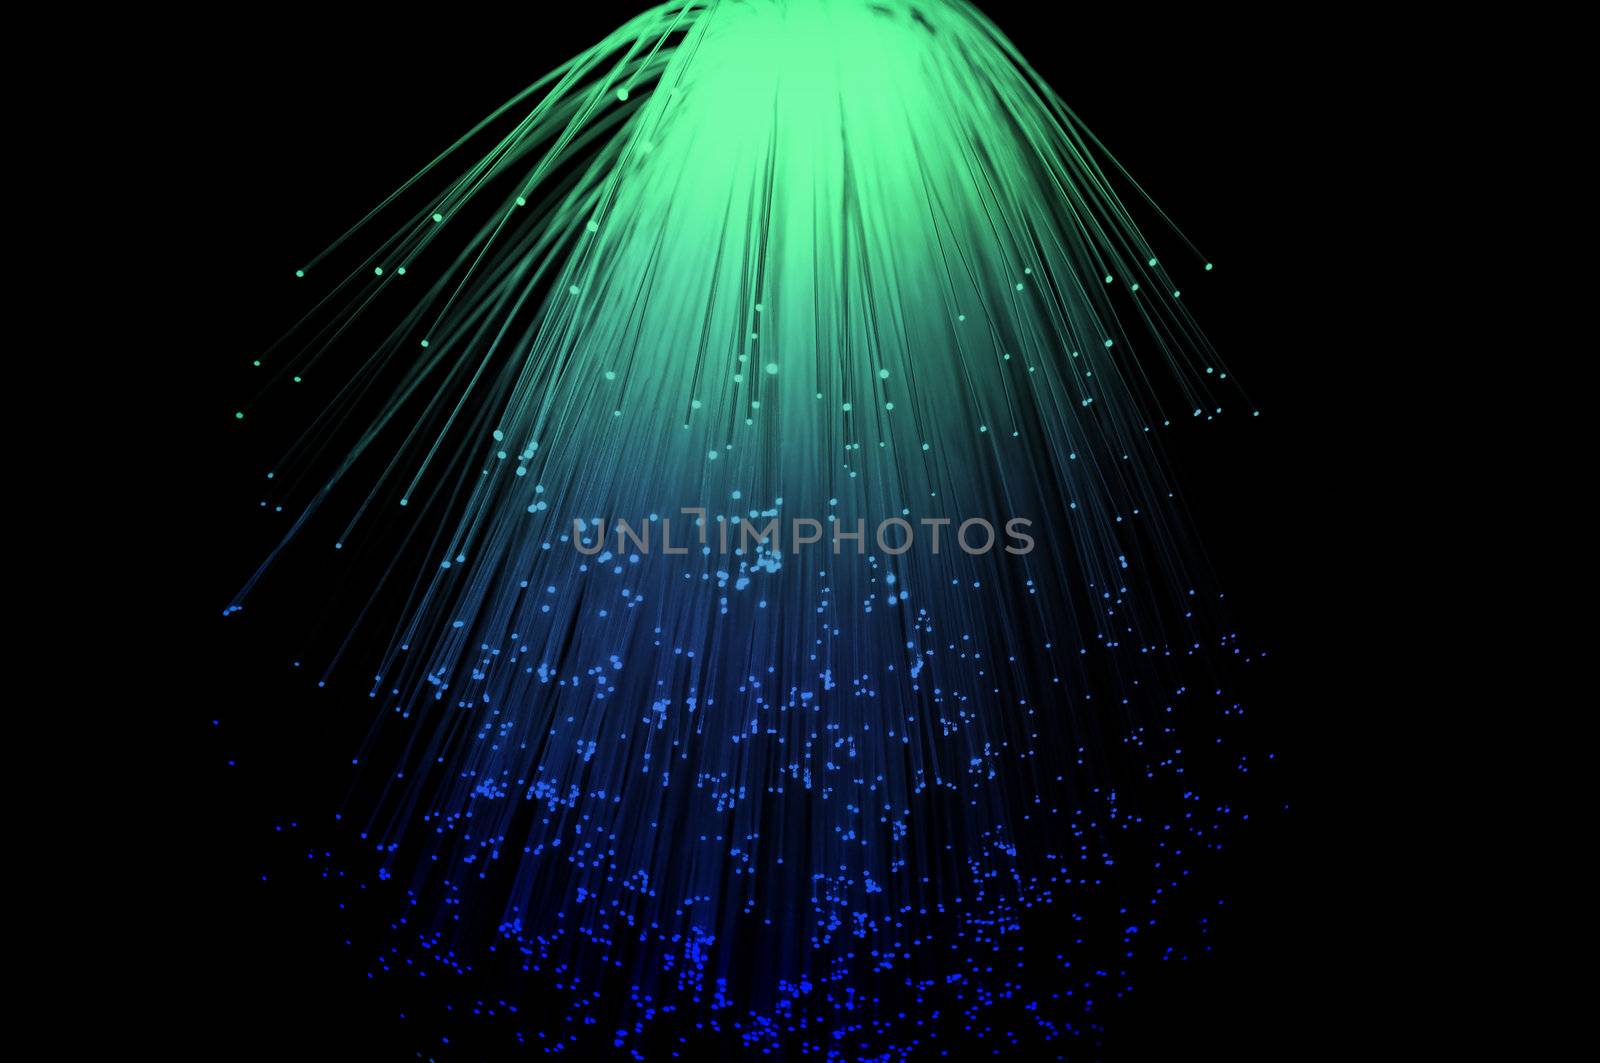 Blue and green coloured fibre optic light strands cascading down with a black background.